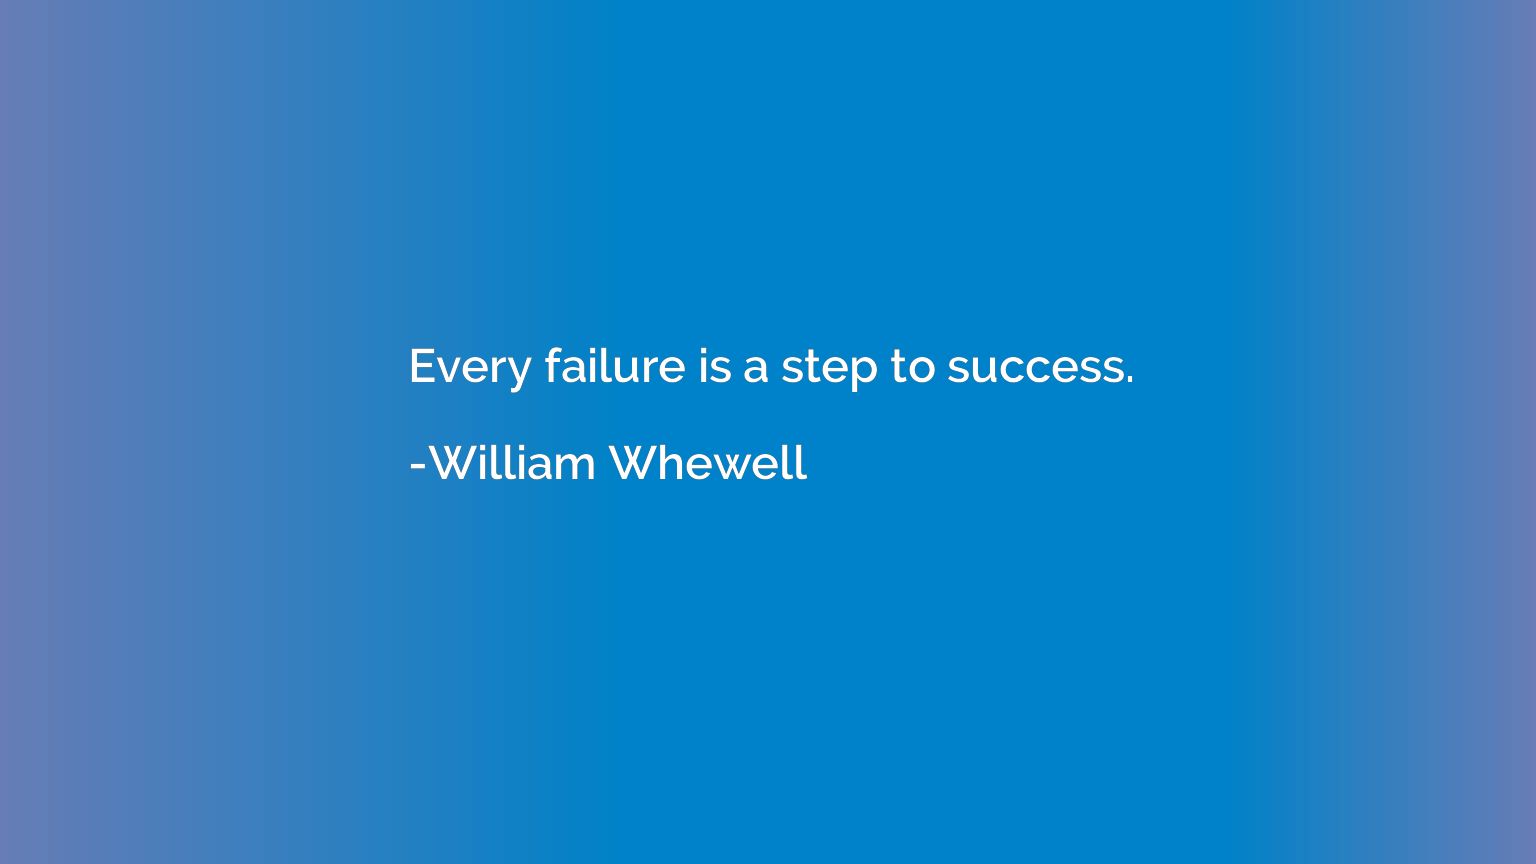 Every failure is a step to success.